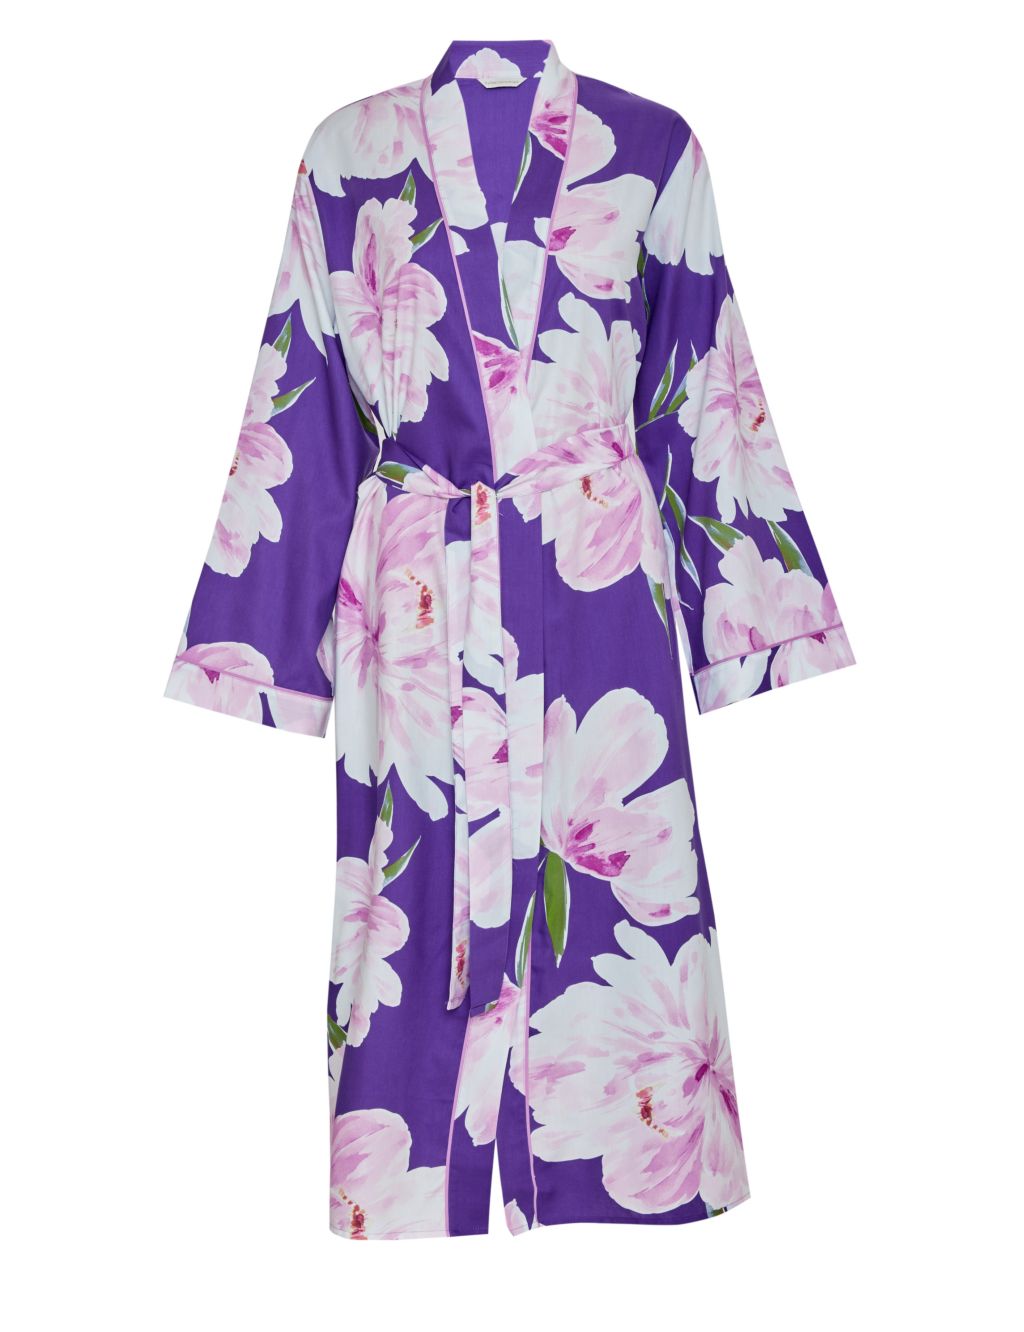 Cotton Modal Floral Dressing Gown image 2